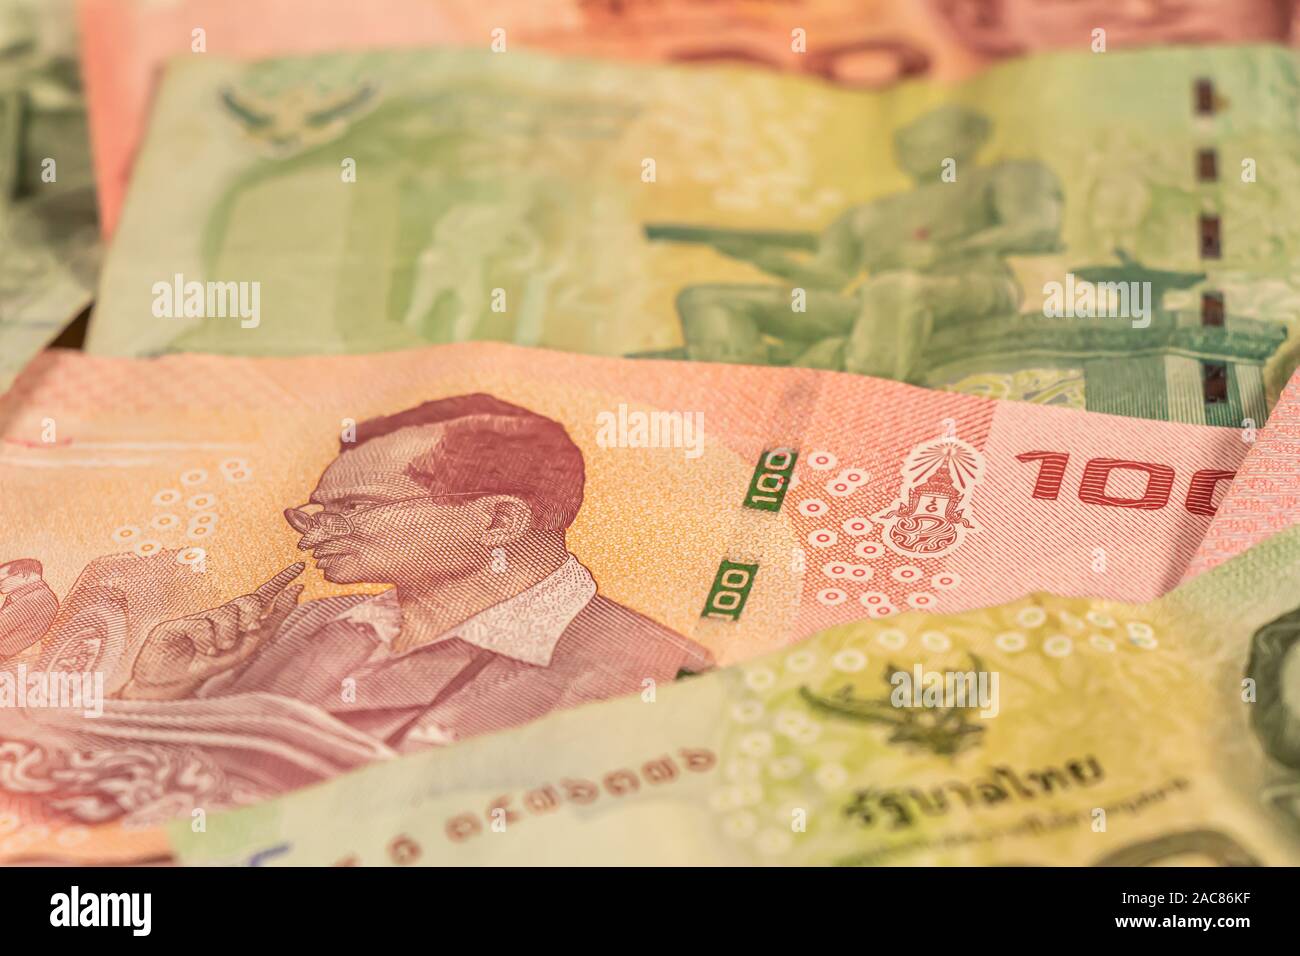 A composition of Thai baht. THB banknotes providing great options to be used for illustrating subjects as business, banking, media, etc. Stock Photo